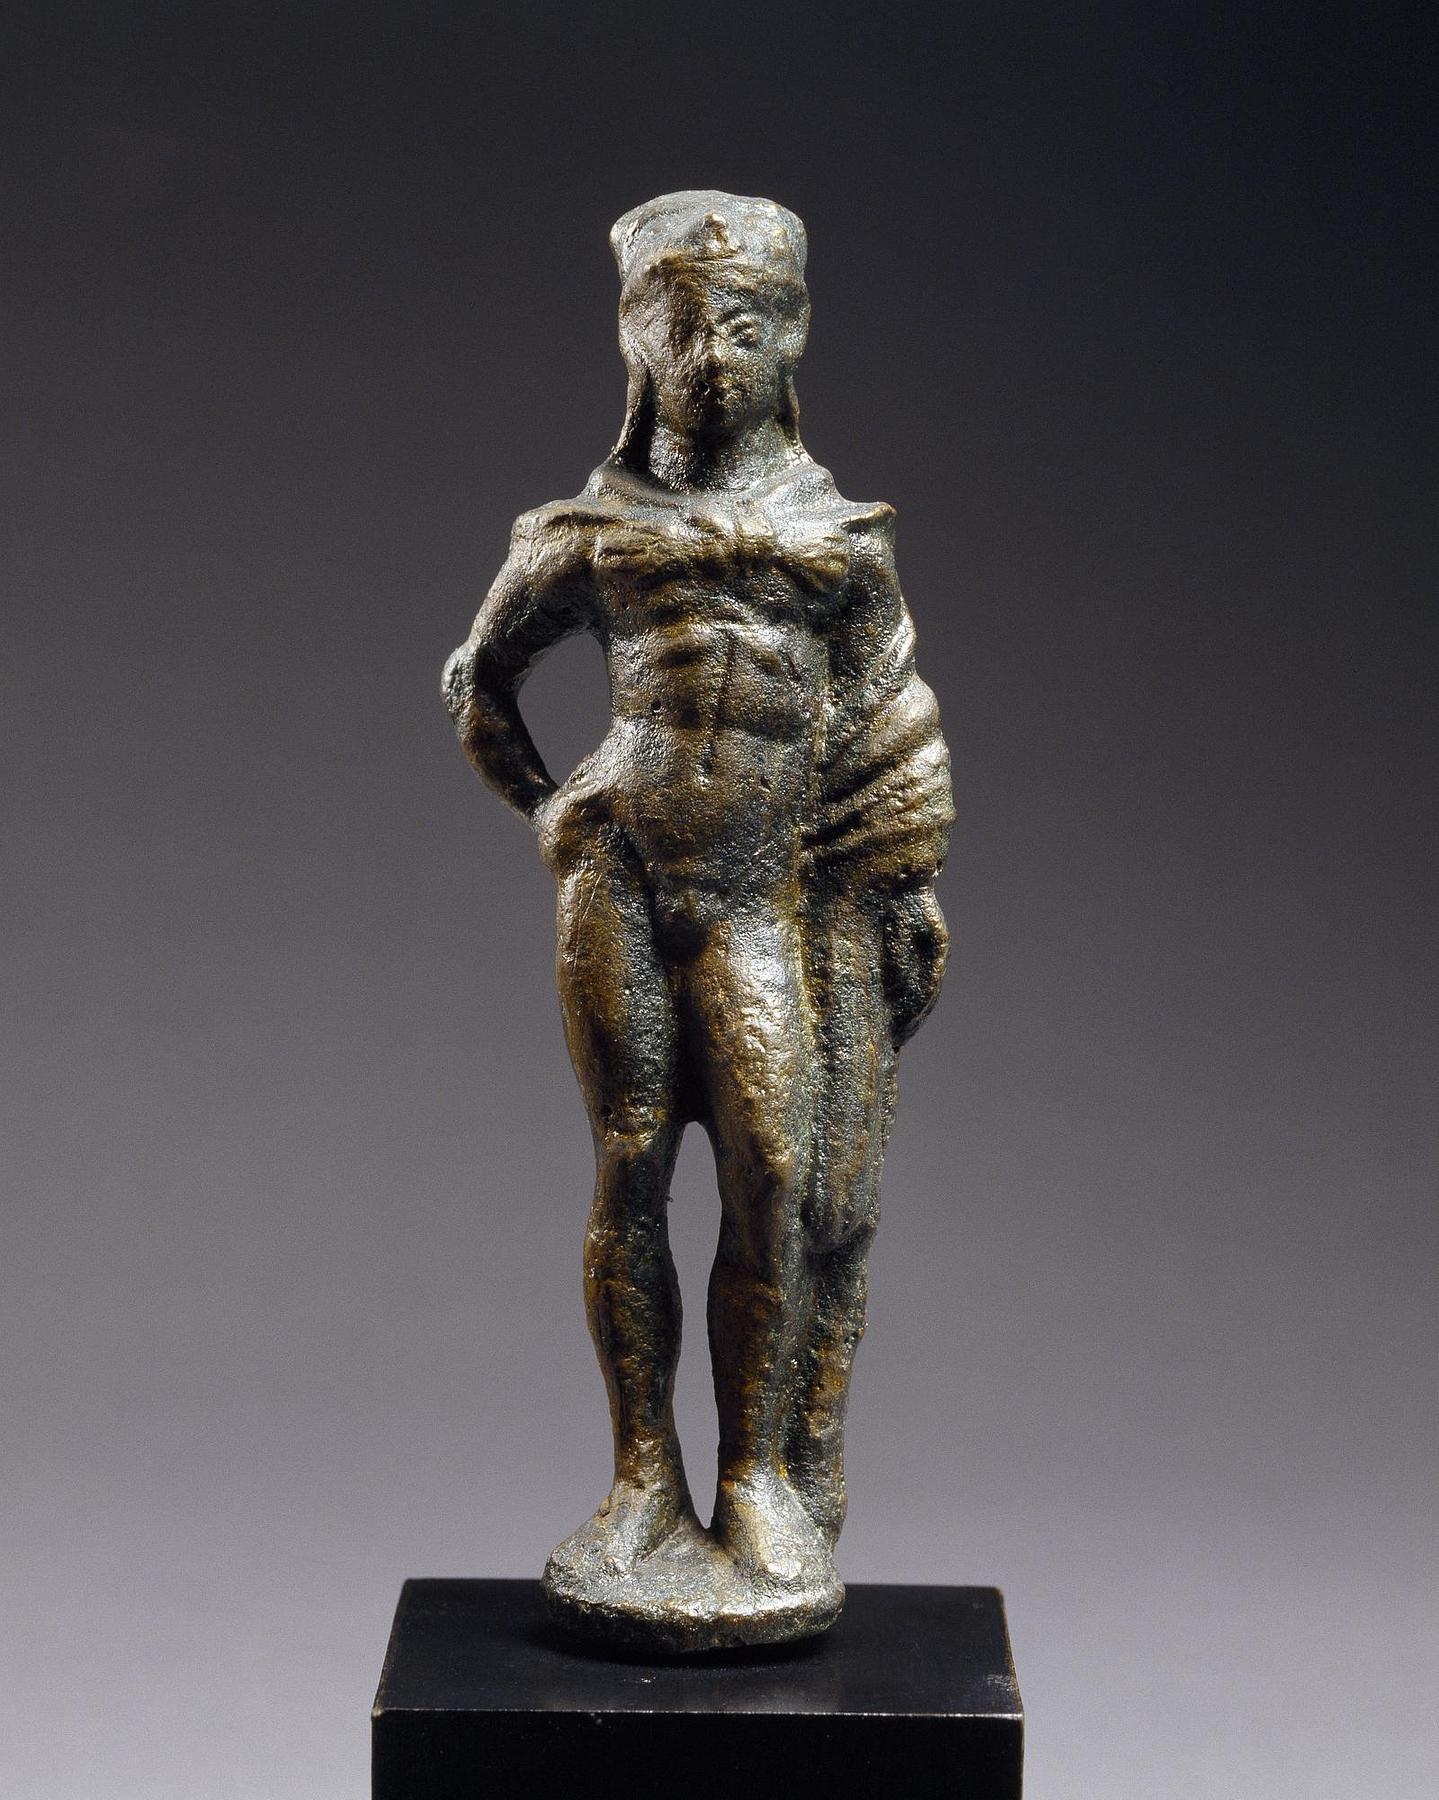 Statuette of the young Hercules, H2068